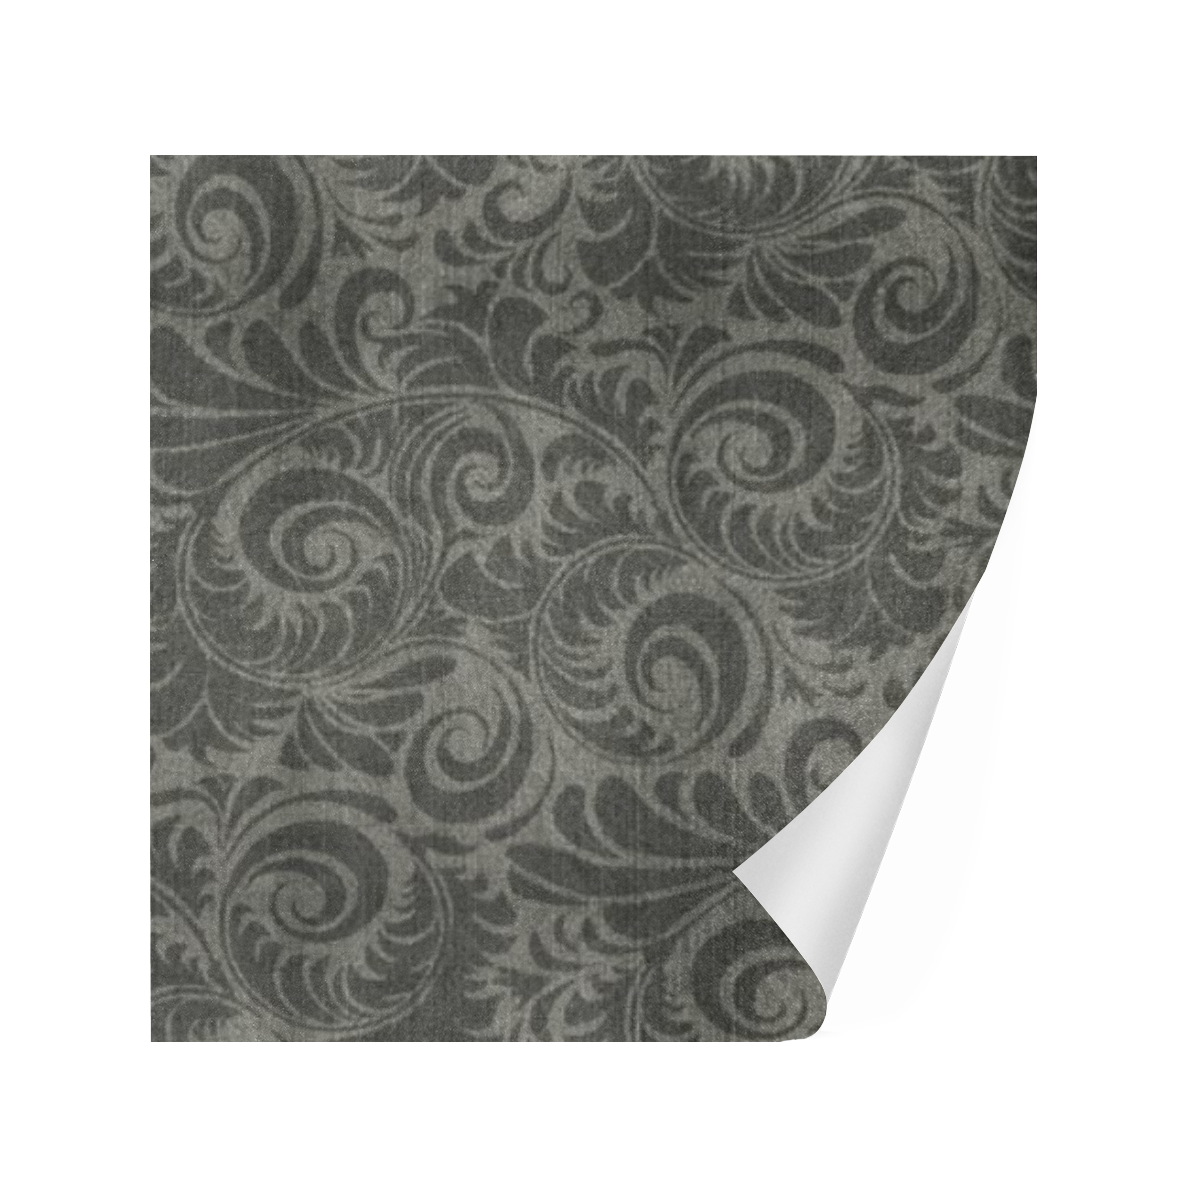 Denim, vintage floral pattern,light brown and grey Gift Wrapping Paper 58"x 23" (5 Rolls)